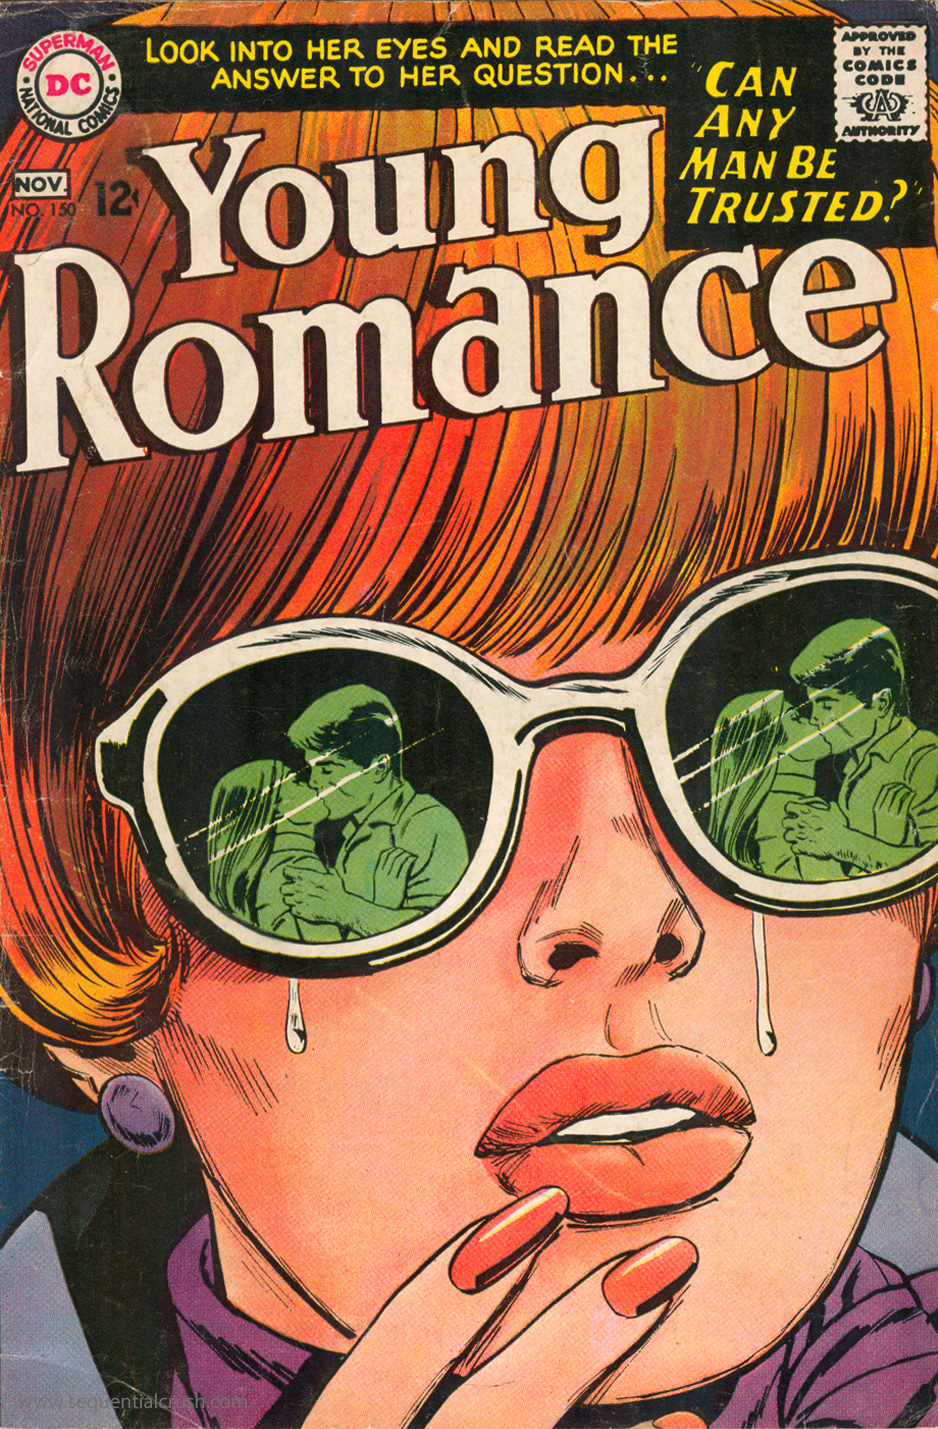 Image result for young romance 150 comic book"